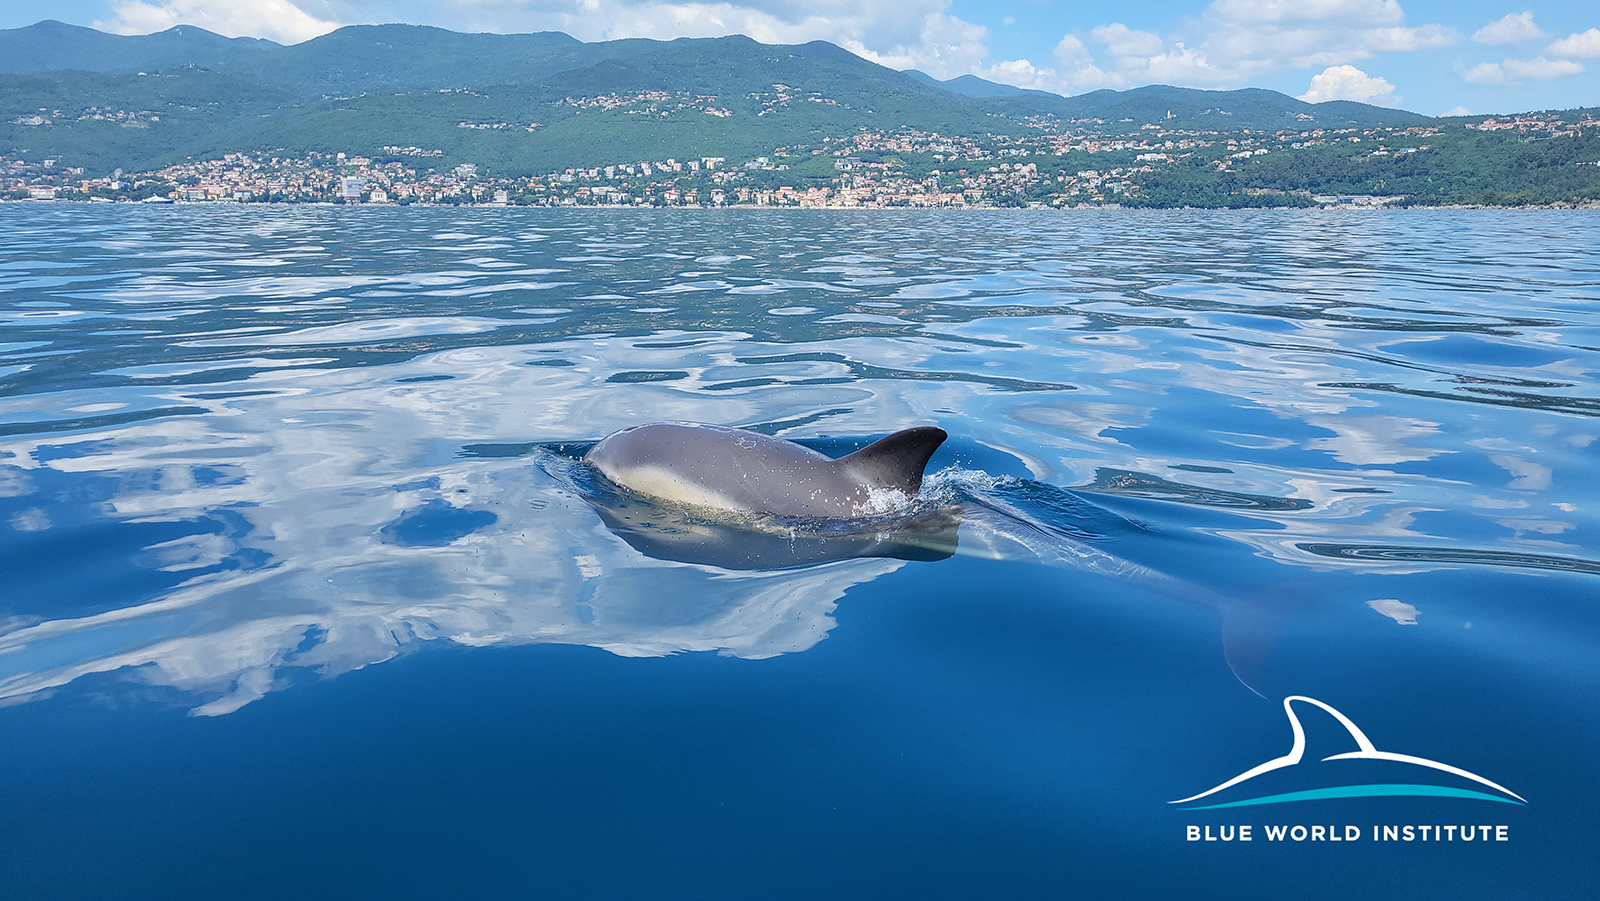 Solitary common dolphins in Rijeka Bay and near Rab Island - people warned not to approach